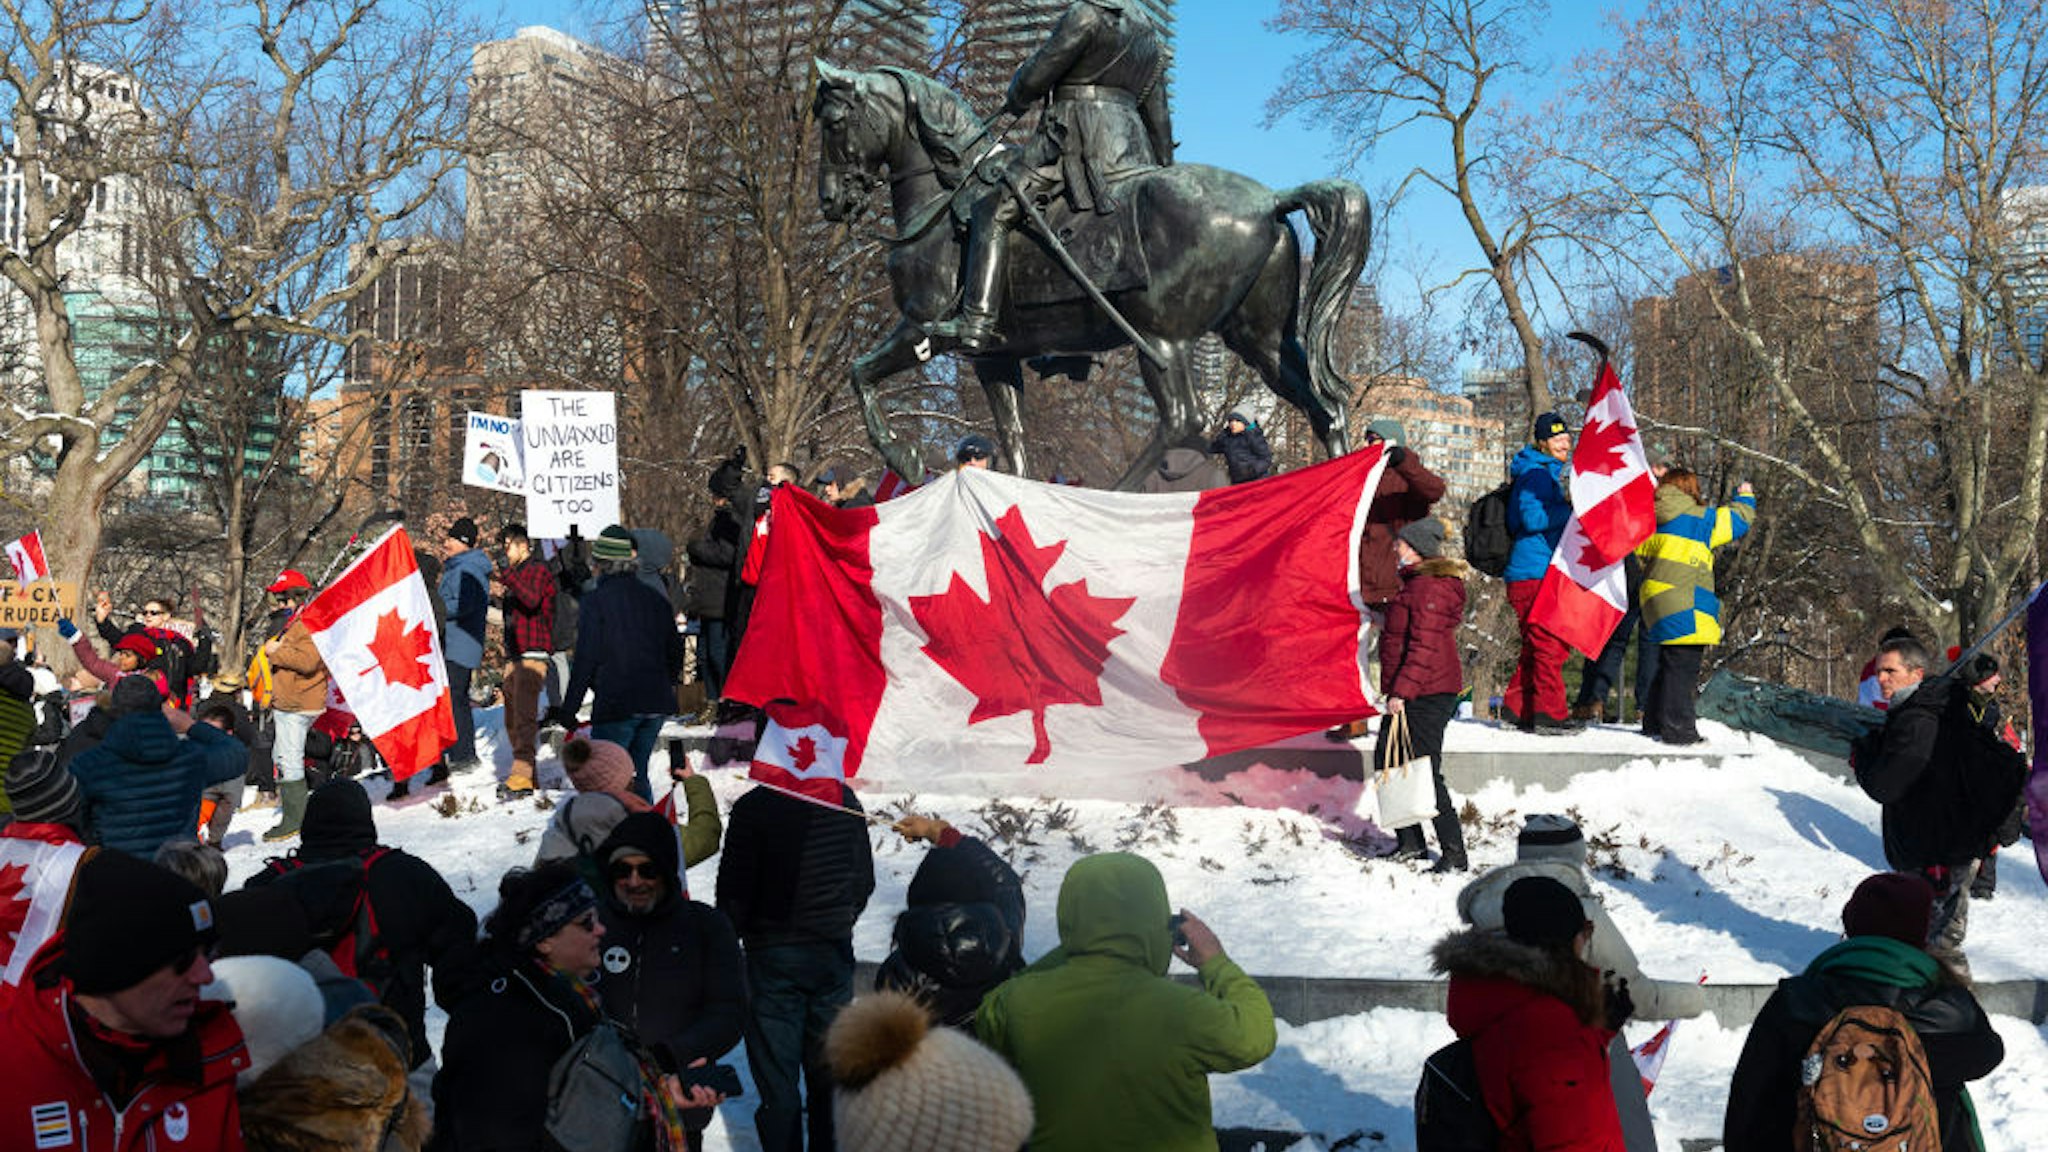 Demonstrators gather for a protest against Covid-19 vaccine mandates and restrictions in downtown Toronto, Canada, on February 5, 2022. Protesters again poured into Toronto and Ottawa early on February 5 to join a convoy of truckers whose occupation of Ottawa to denounce Covid vaccine mandates is now in its second week (Photo by Anatoliy Cherkasov/NurPhoto via Getty Images)